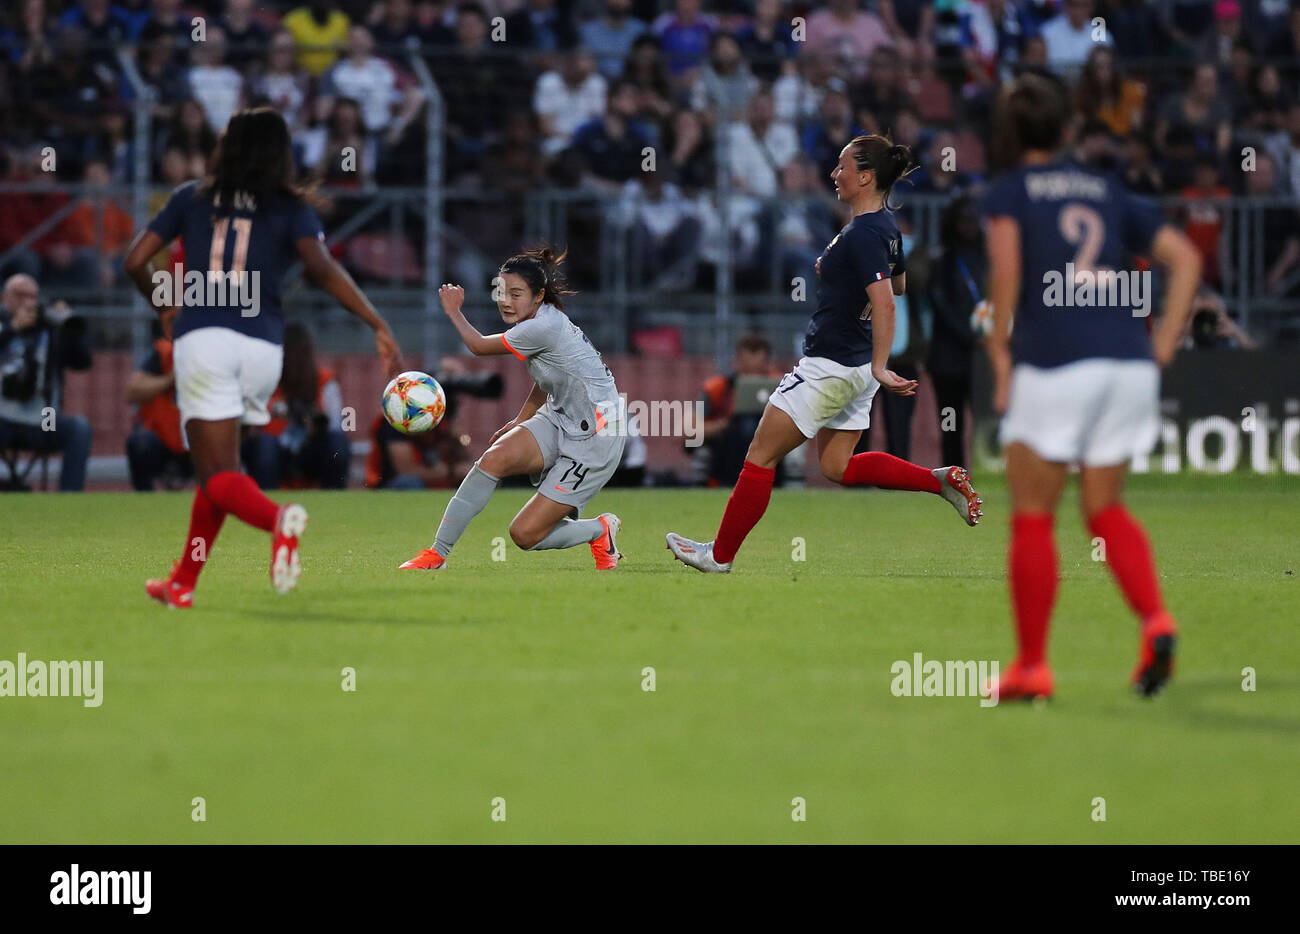 Creteil, France. 31st May, 2019. Wang Ying (2nd L) of China competes during a friendly soccer match between France and China in Creteil, France, May 31, 2019. France won 2-1. Credit: Gao Jing/Xinhua/Alamy Live News Stock Photo